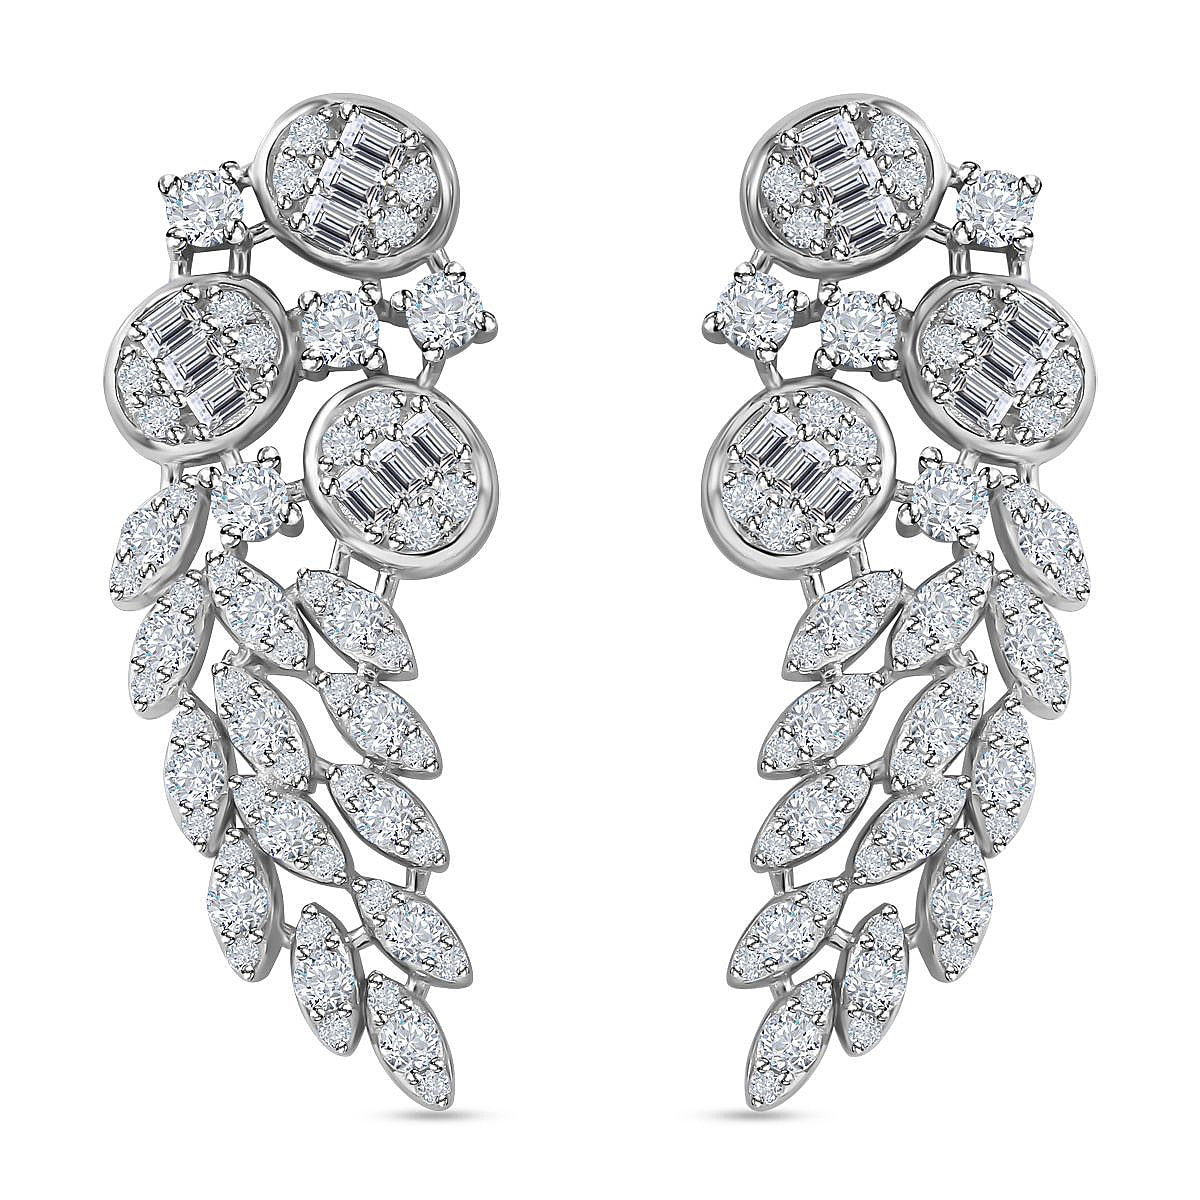 White Cubic Zirconia Earrings in Rhodium Overlay Sterling Silver 4.42 ct,  Silver Wt. 7.56 Gms  4.420  Ct.